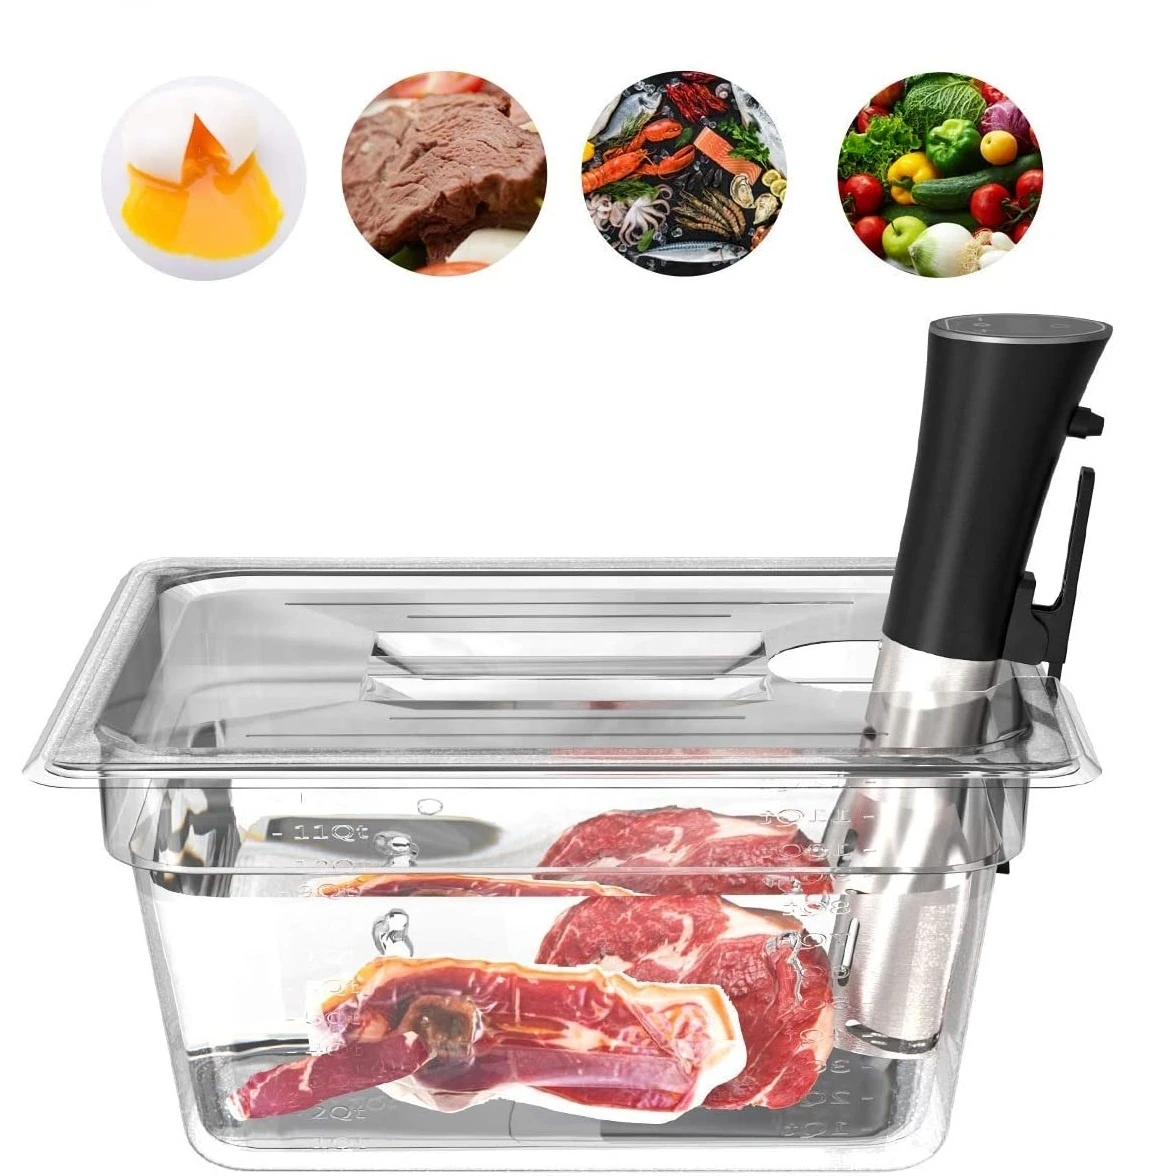 Sous Vide Cooker Container With 3 Sizes 6L 11L 25L For Immersion Circulators Sous-Vide Machine Food Grade PC Material